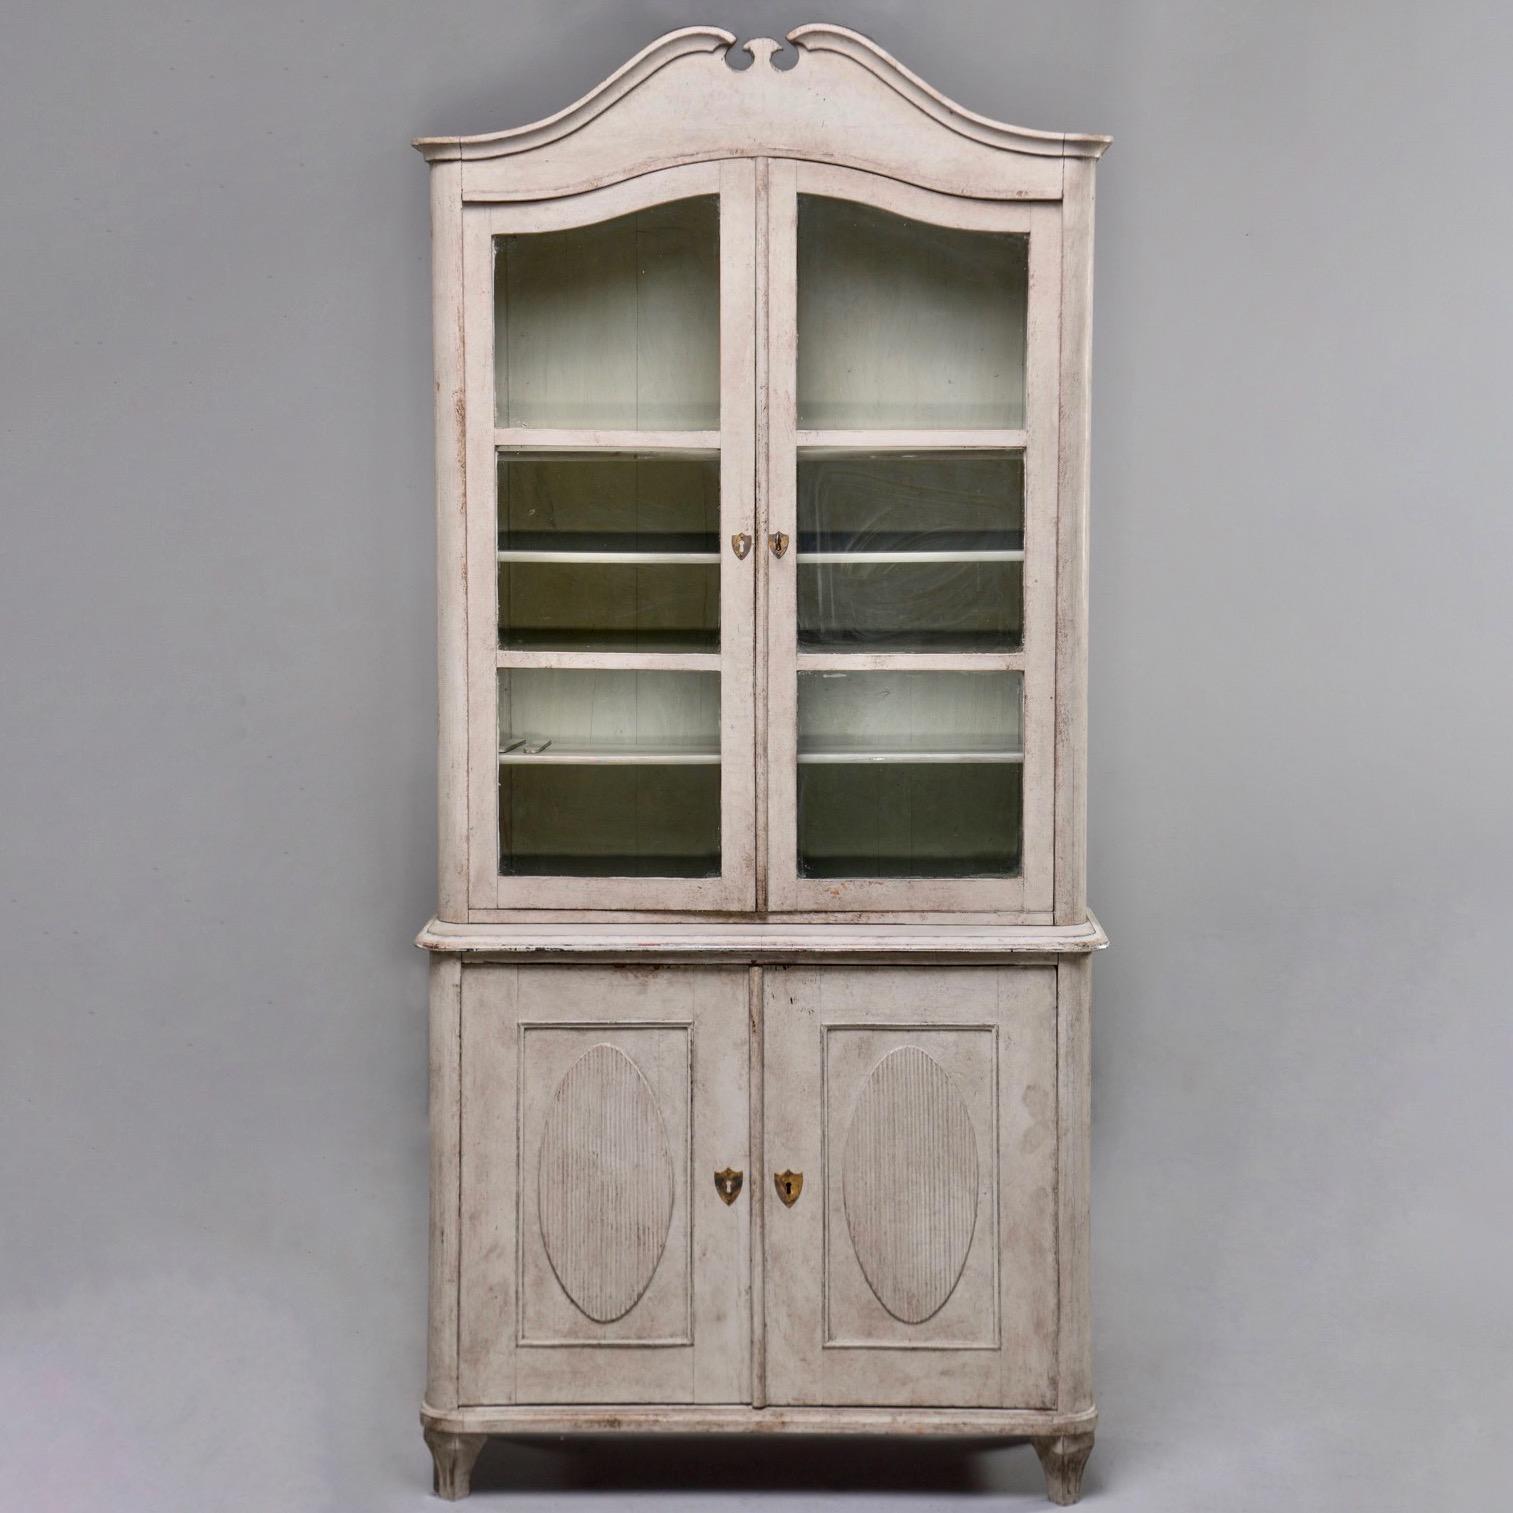 Swedish tall pine Gustavian style cupboard has greige painted finish and glass front doors on the top section with a functional lock and skeleton key, circa 1860s. Top portion has three internal adjustable shelves. Bottom section has decorative